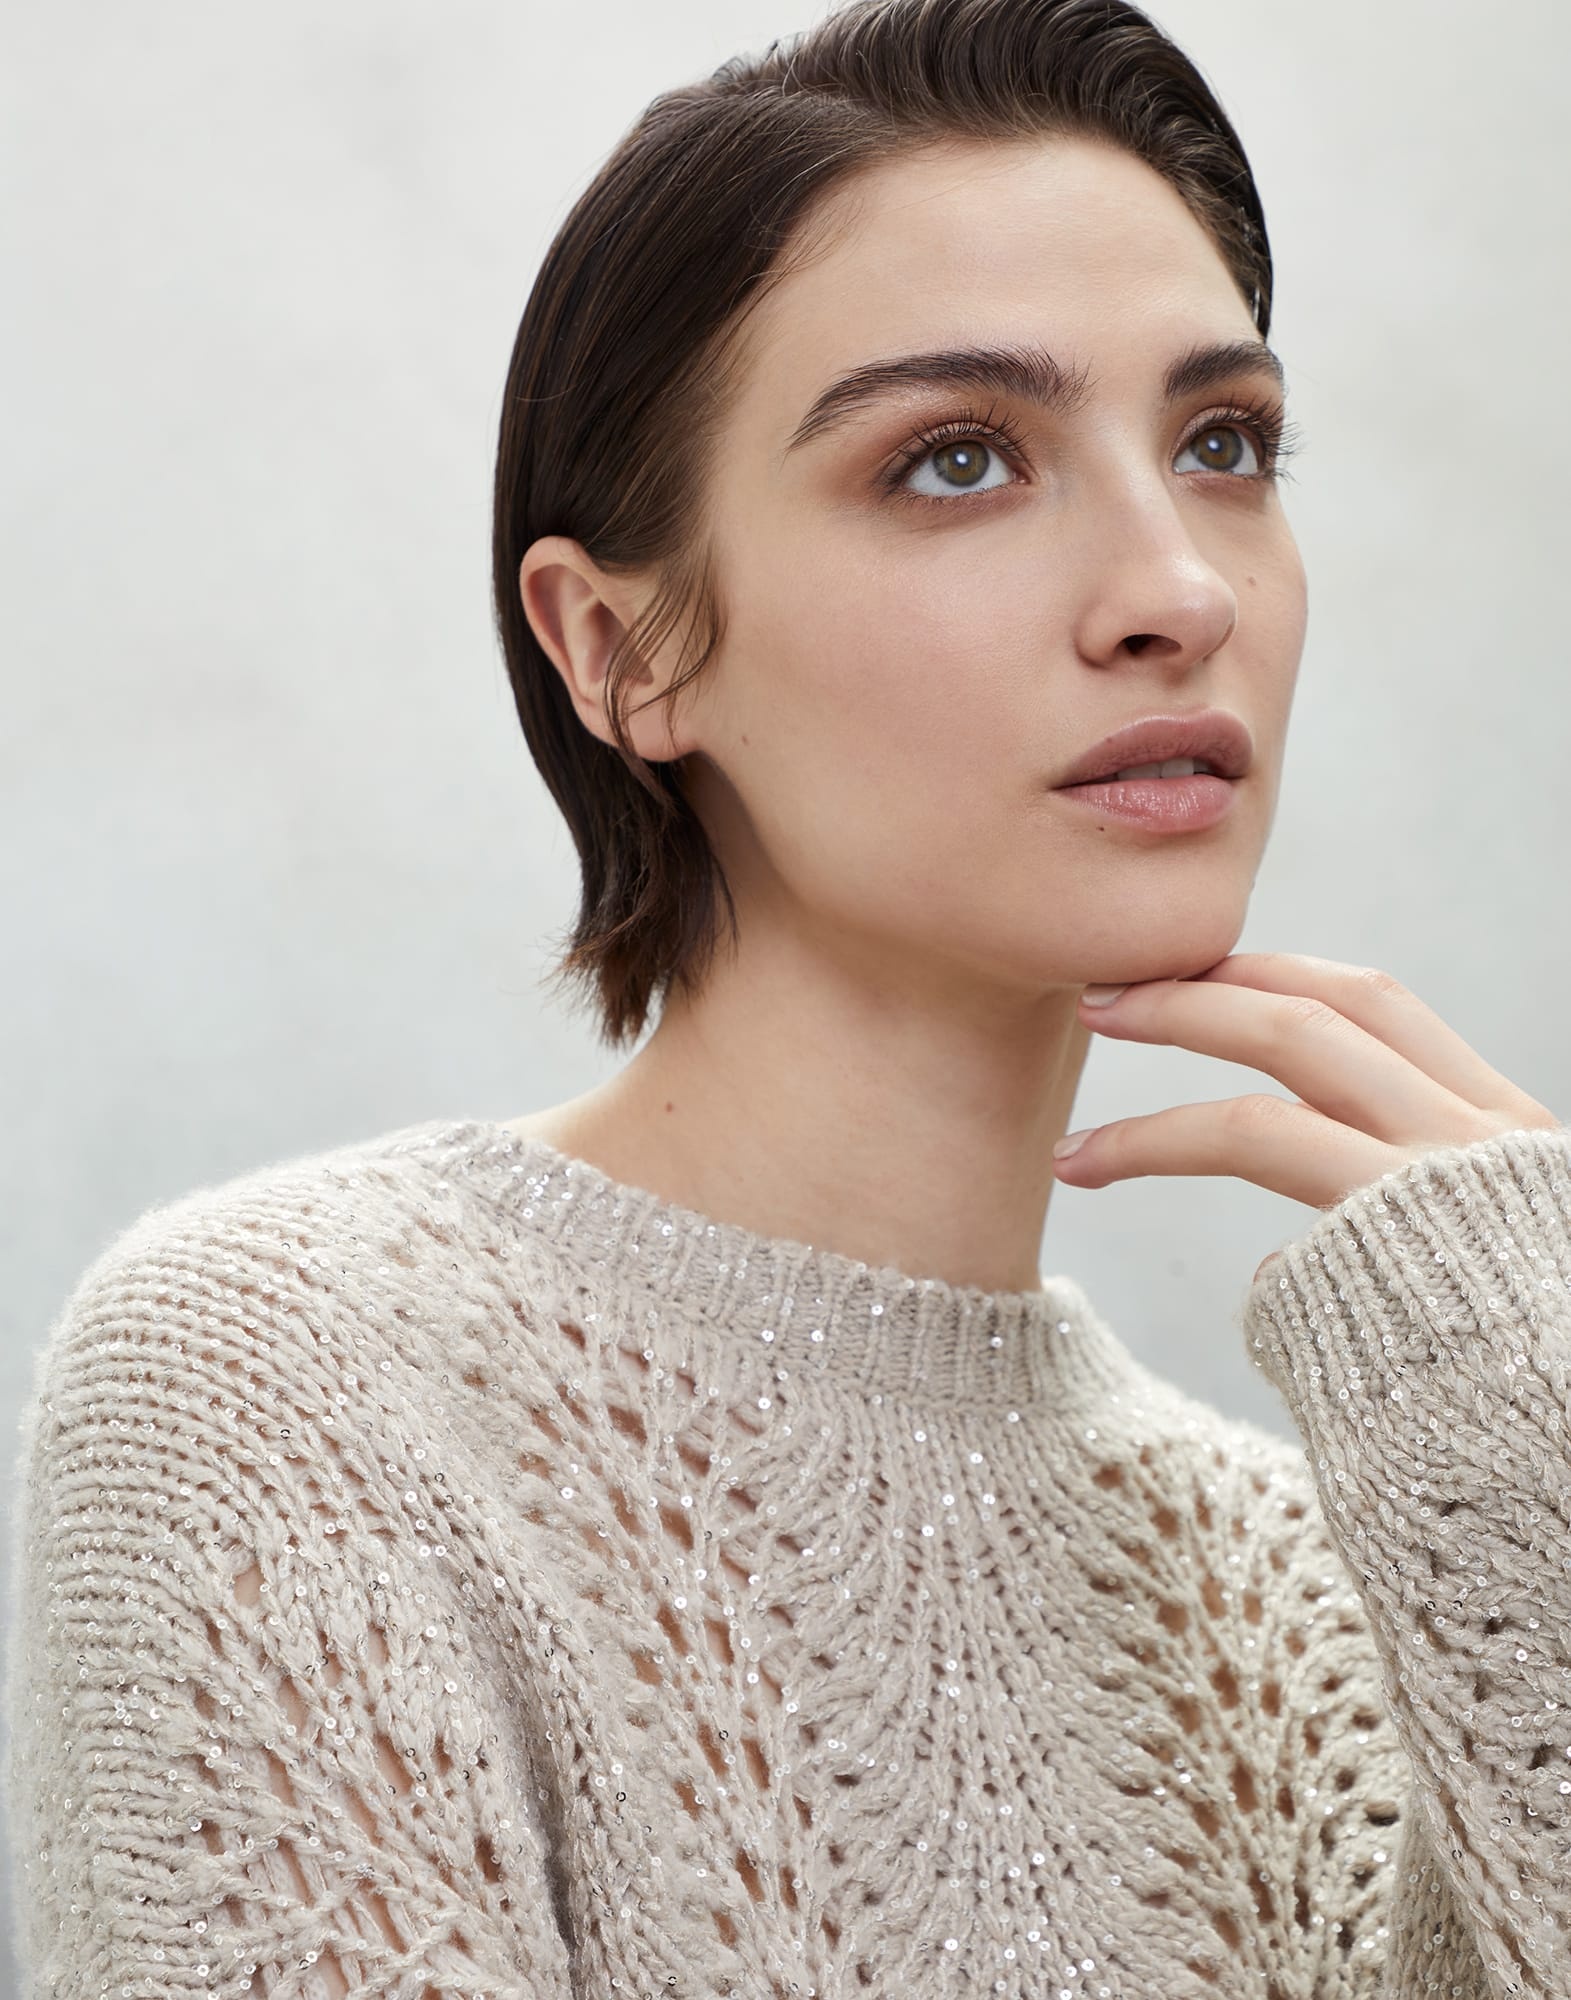 Cashmere Feather yarn sweater